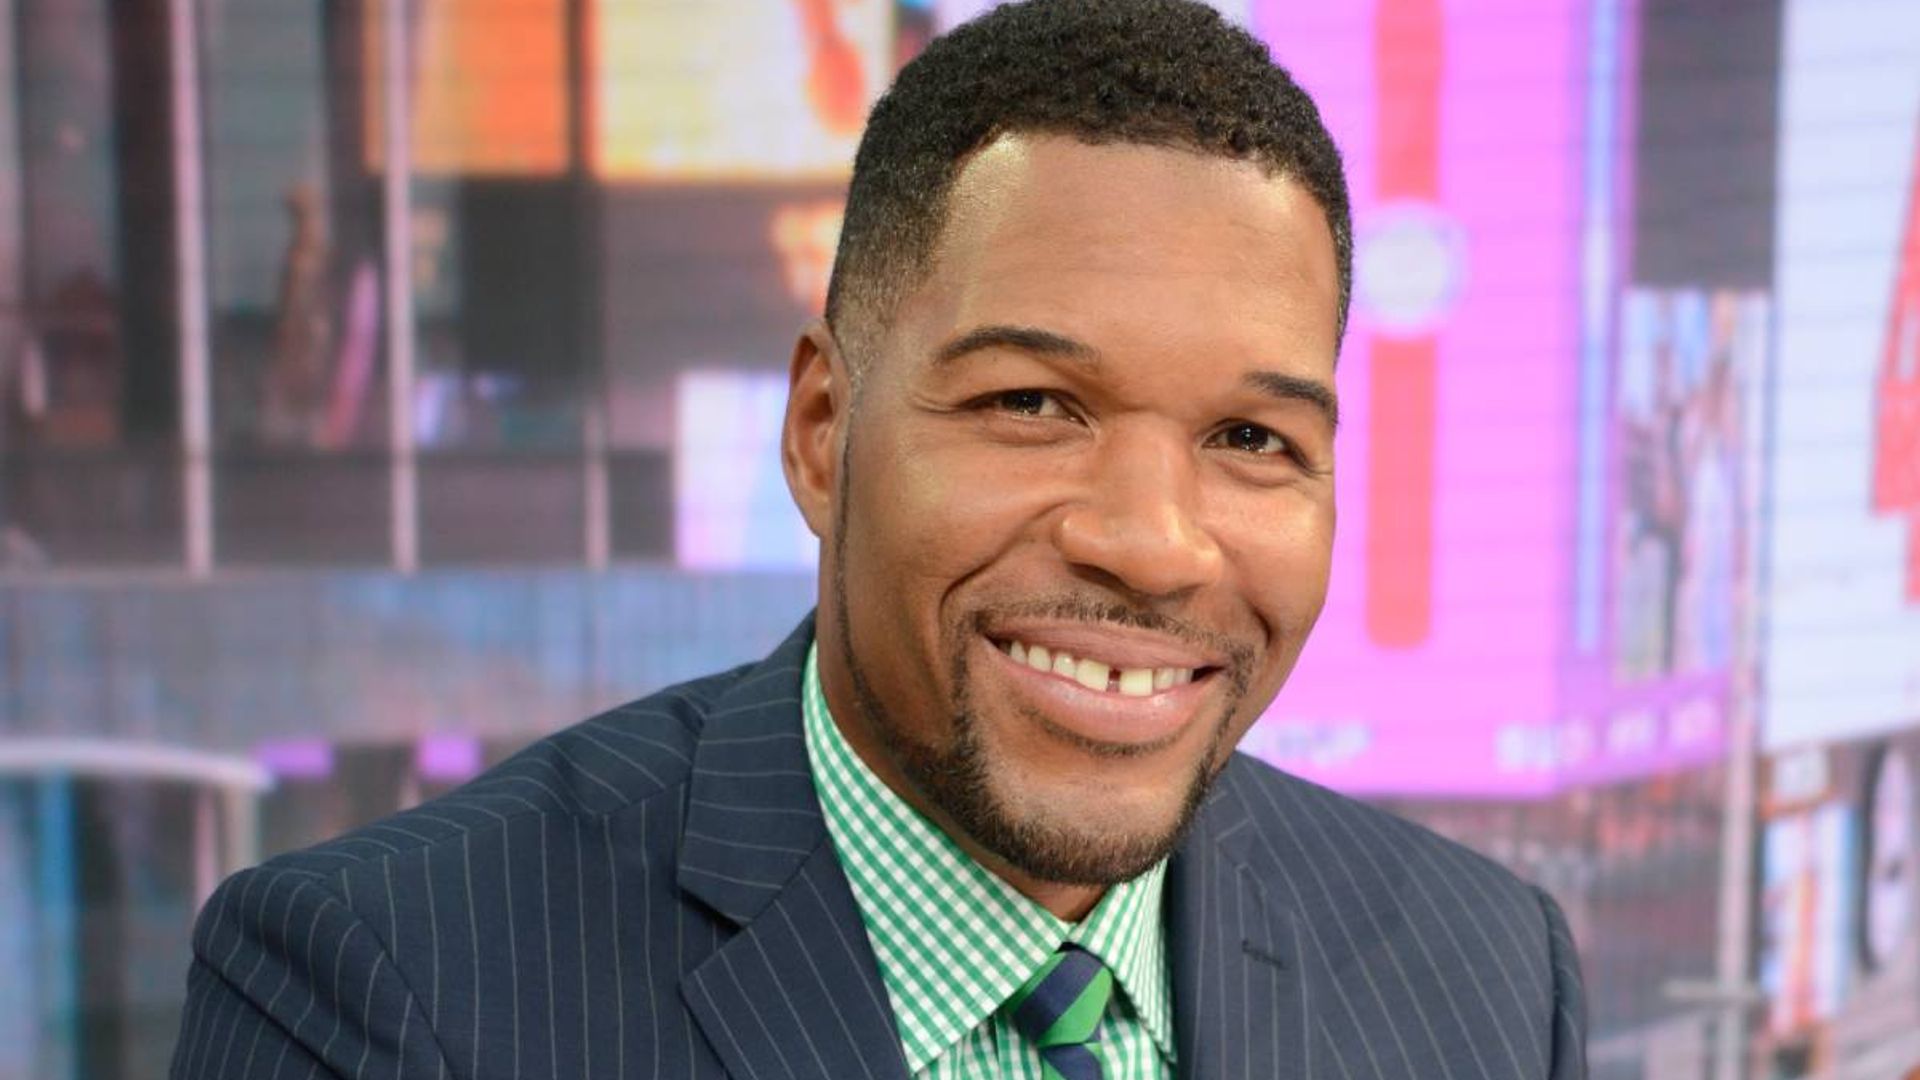 Gmas Michael Strahan Shares Personal News During Time Away From Work As Fans Show Support Hello 